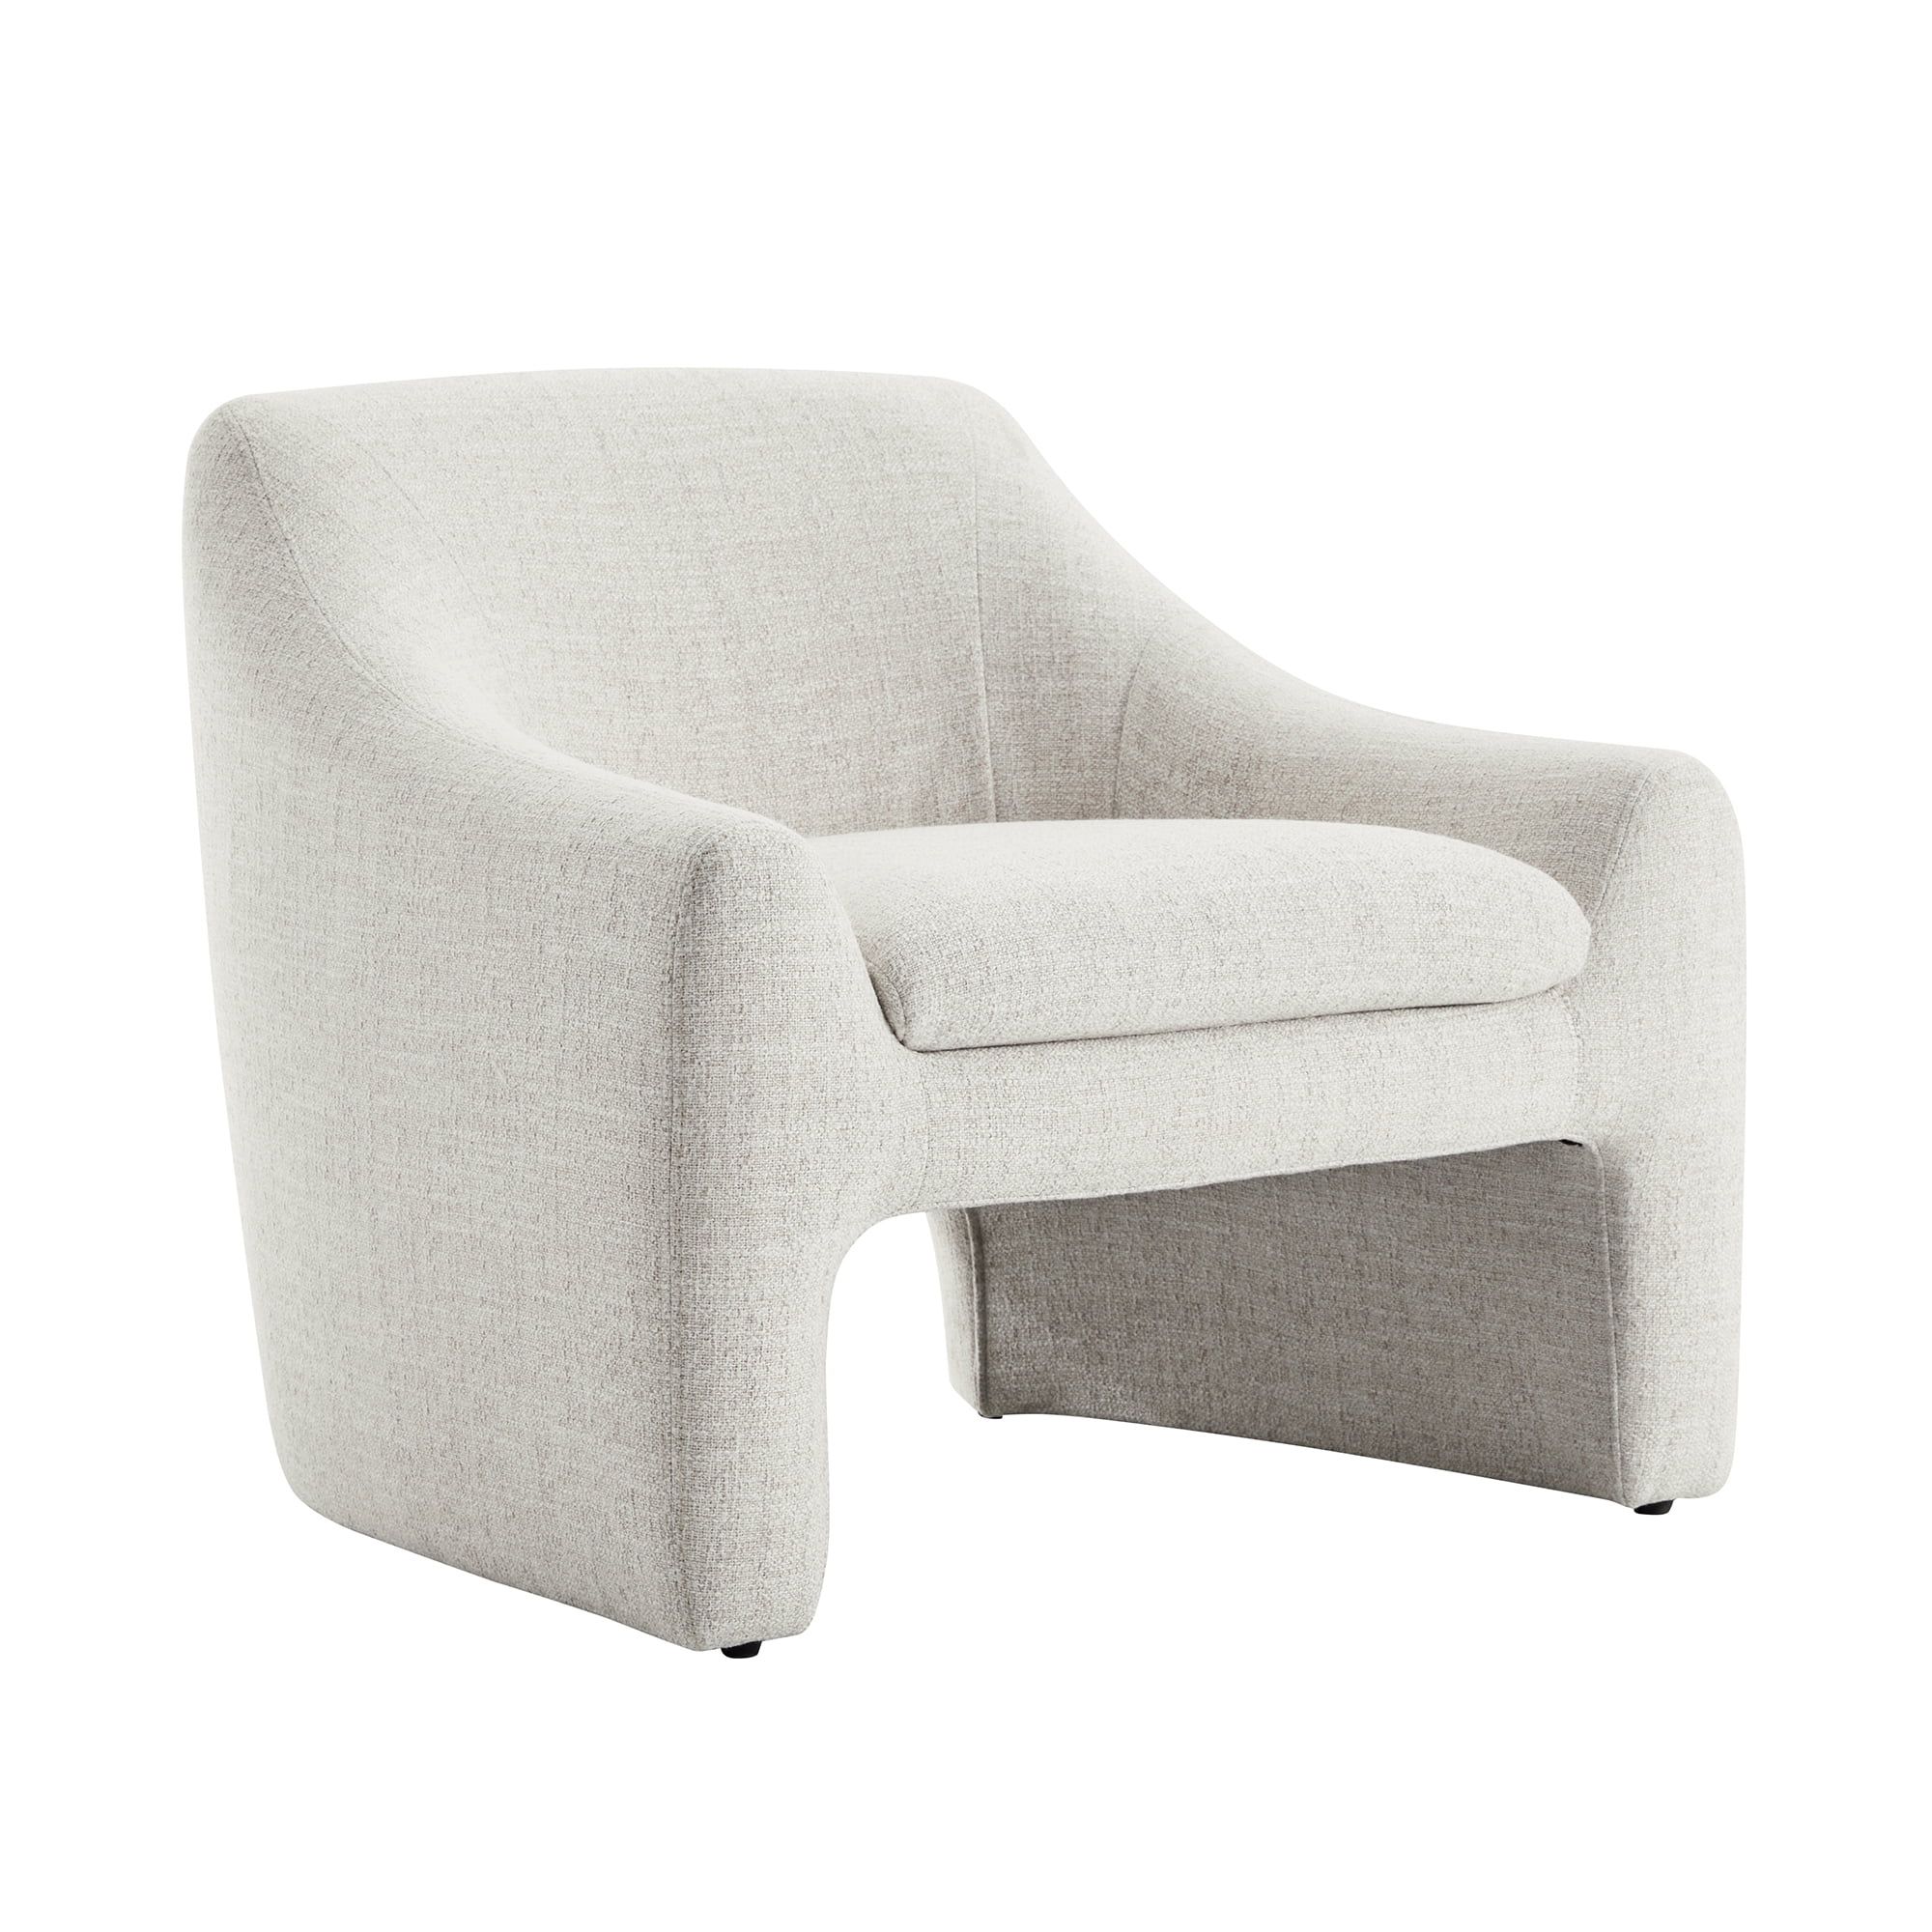 CHITA Modern Accent Chair, Upholstered Arm Chair Living Room Bedroom, Fabric in Cream White | Walmart (US)